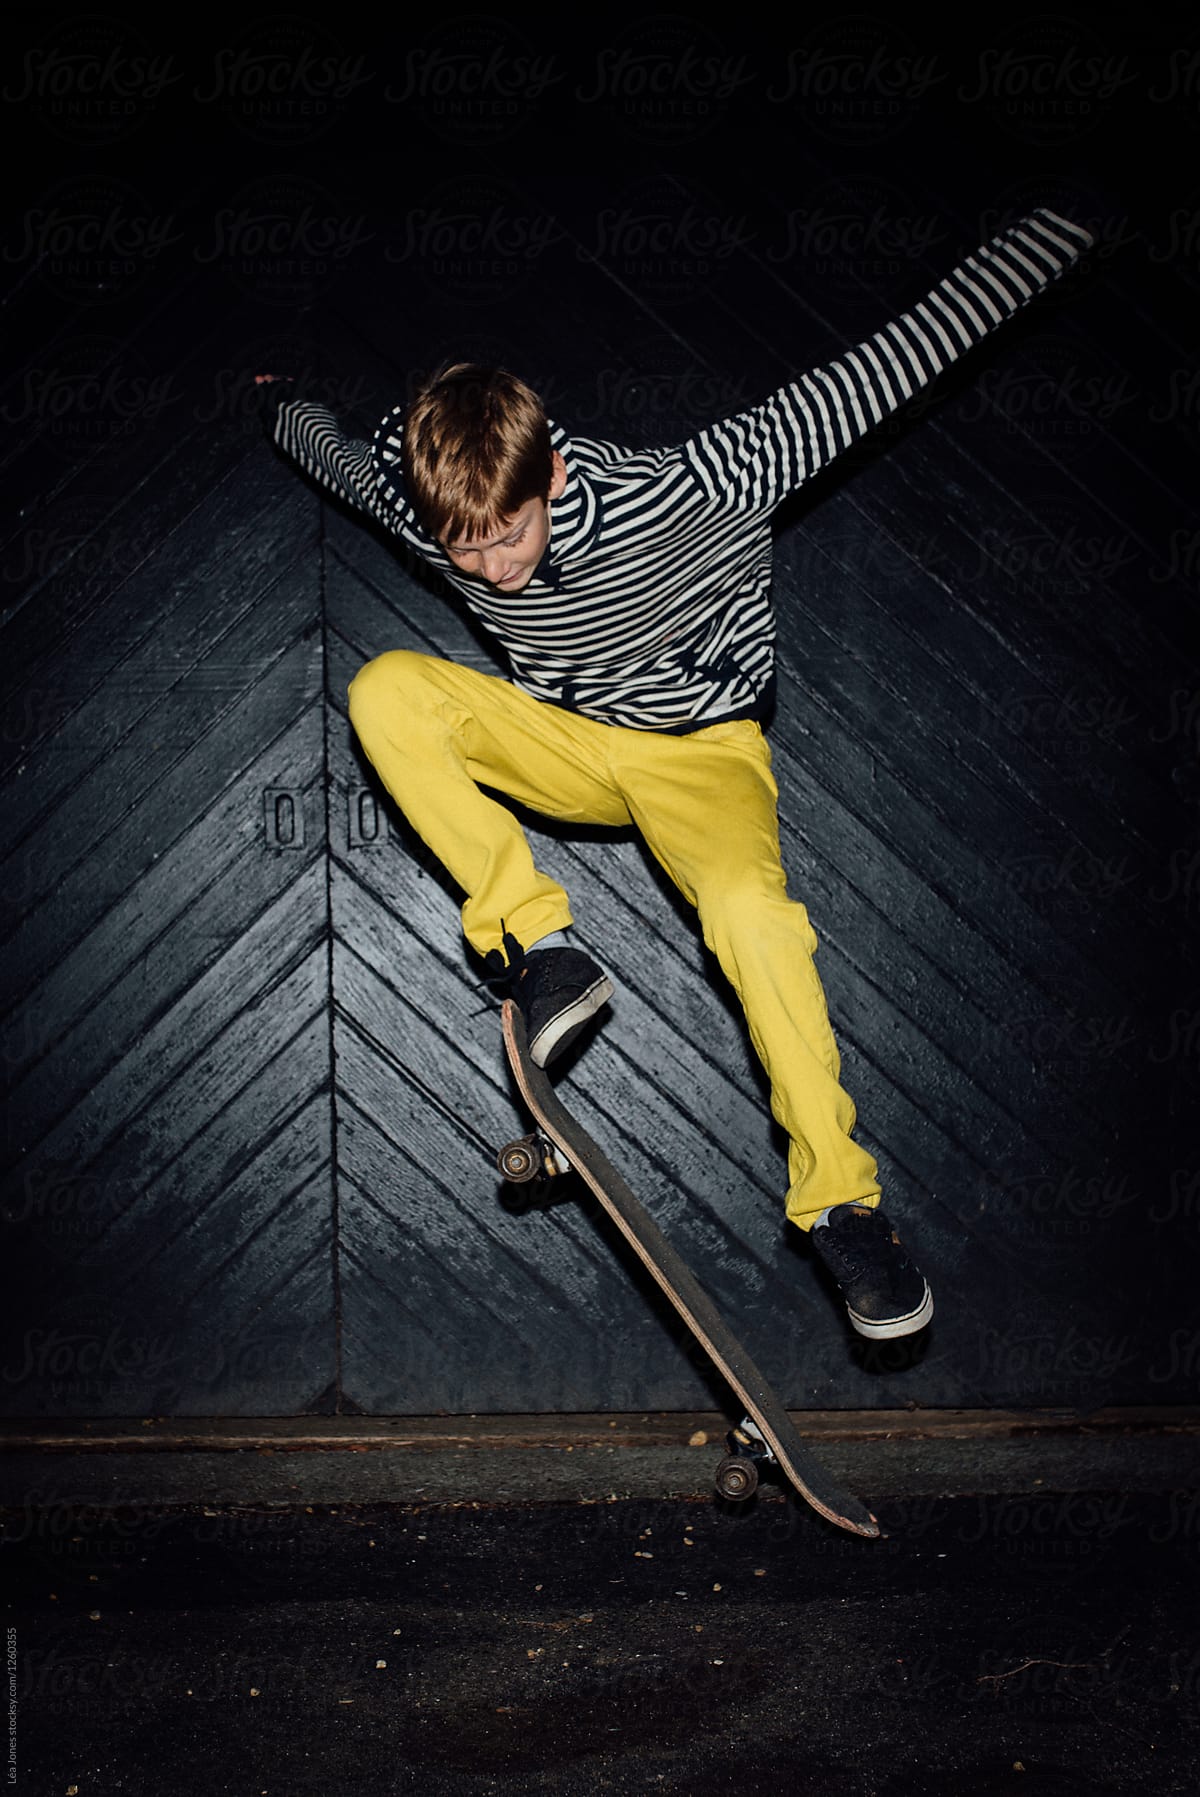 stock photo of teen with yellow trousers on skateboard